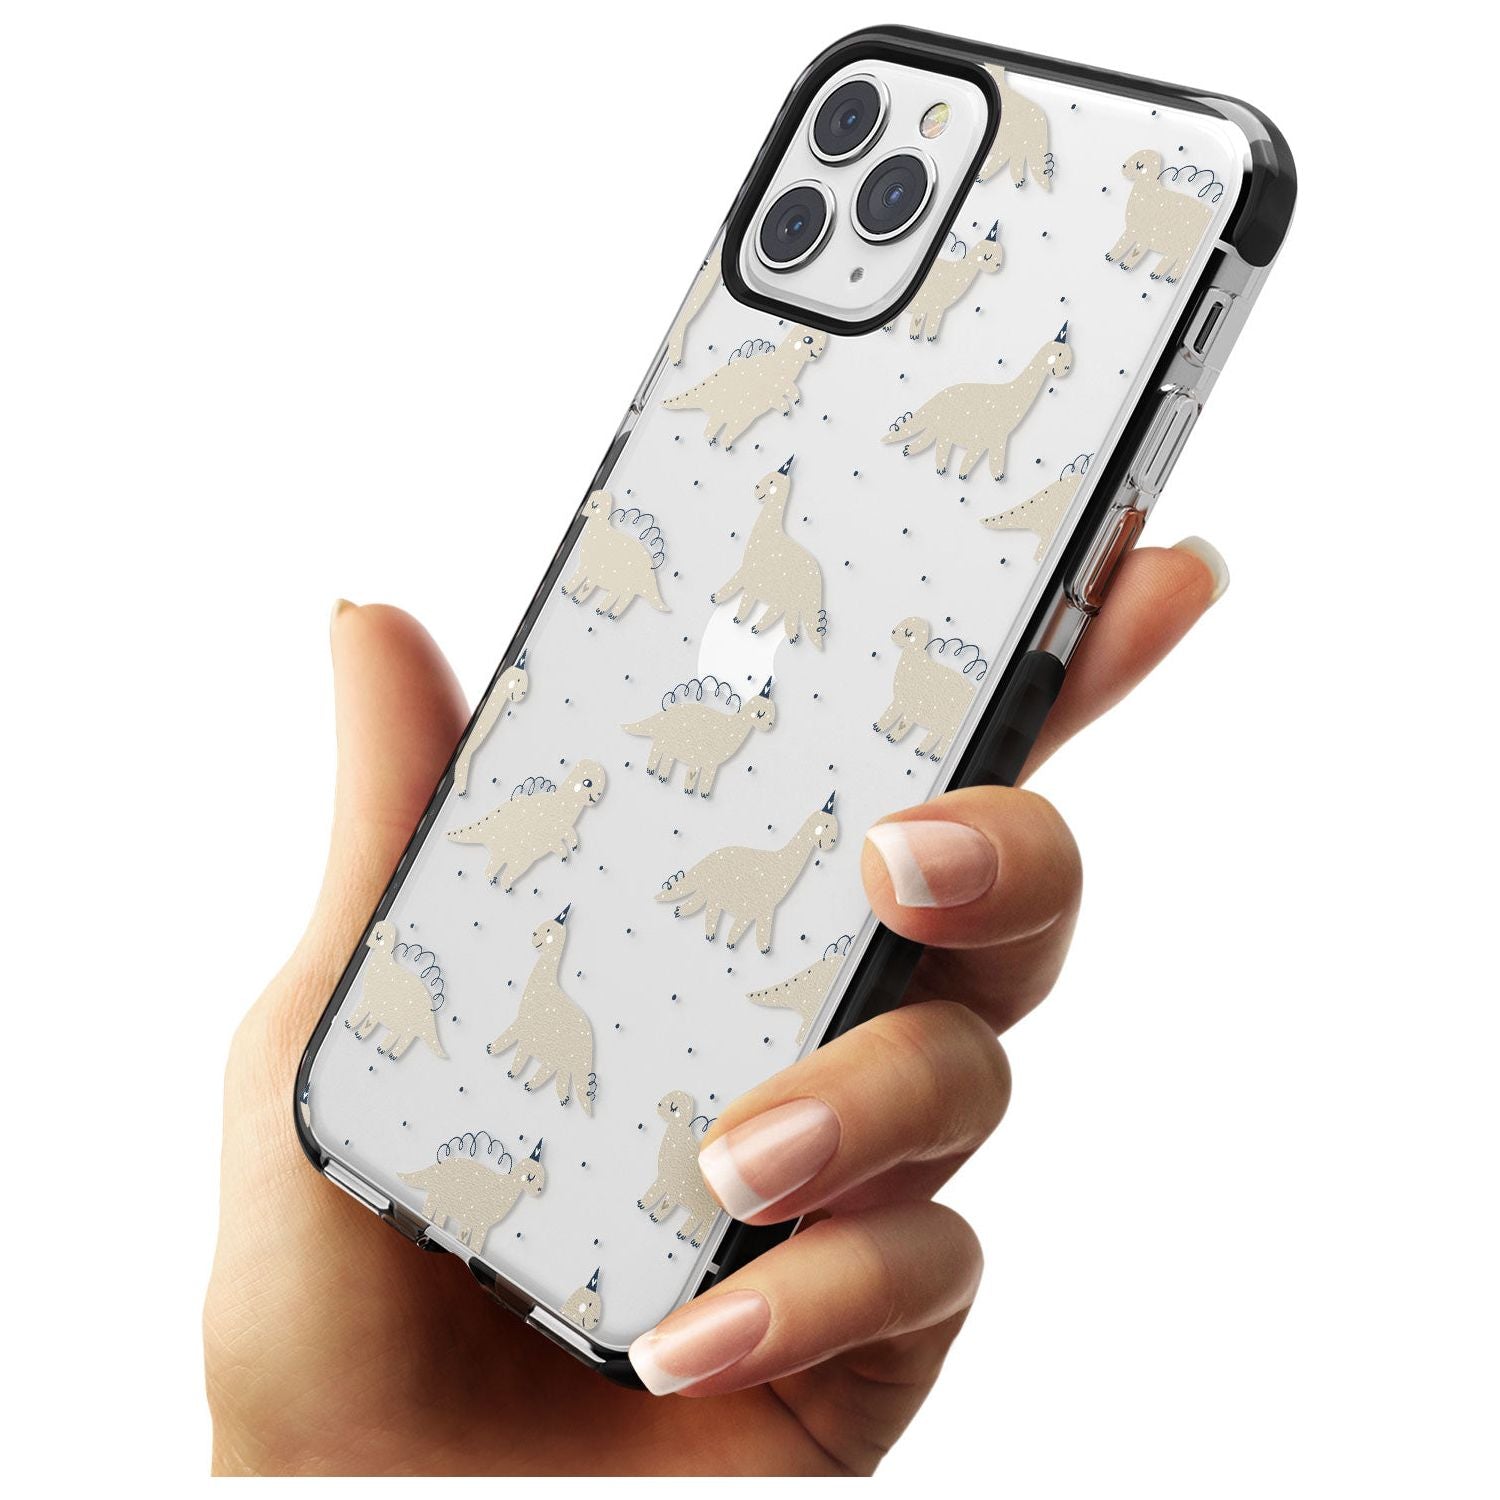 Adorable Dinosaurs Pattern (Clear) Black Impact Phone Case for iPhone 11 Pro Max